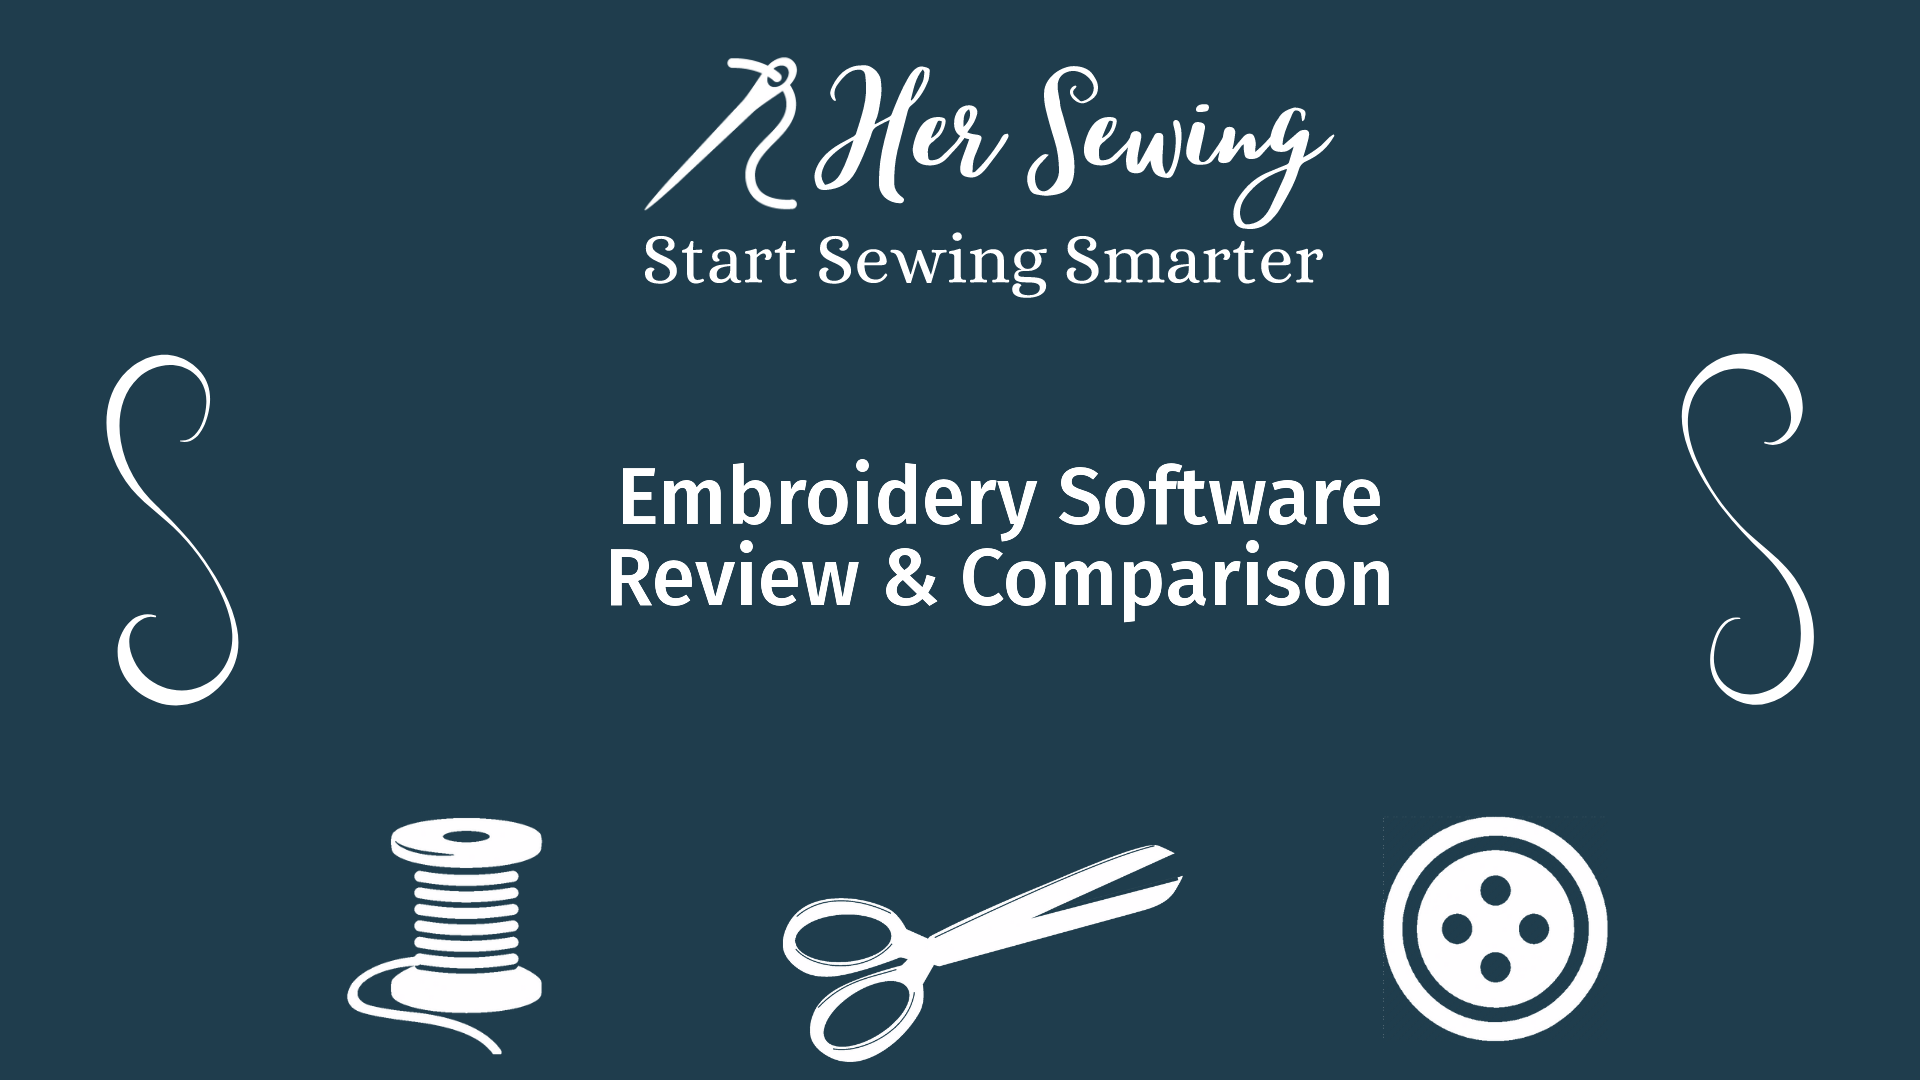 Embroidery Software Review & Comparison